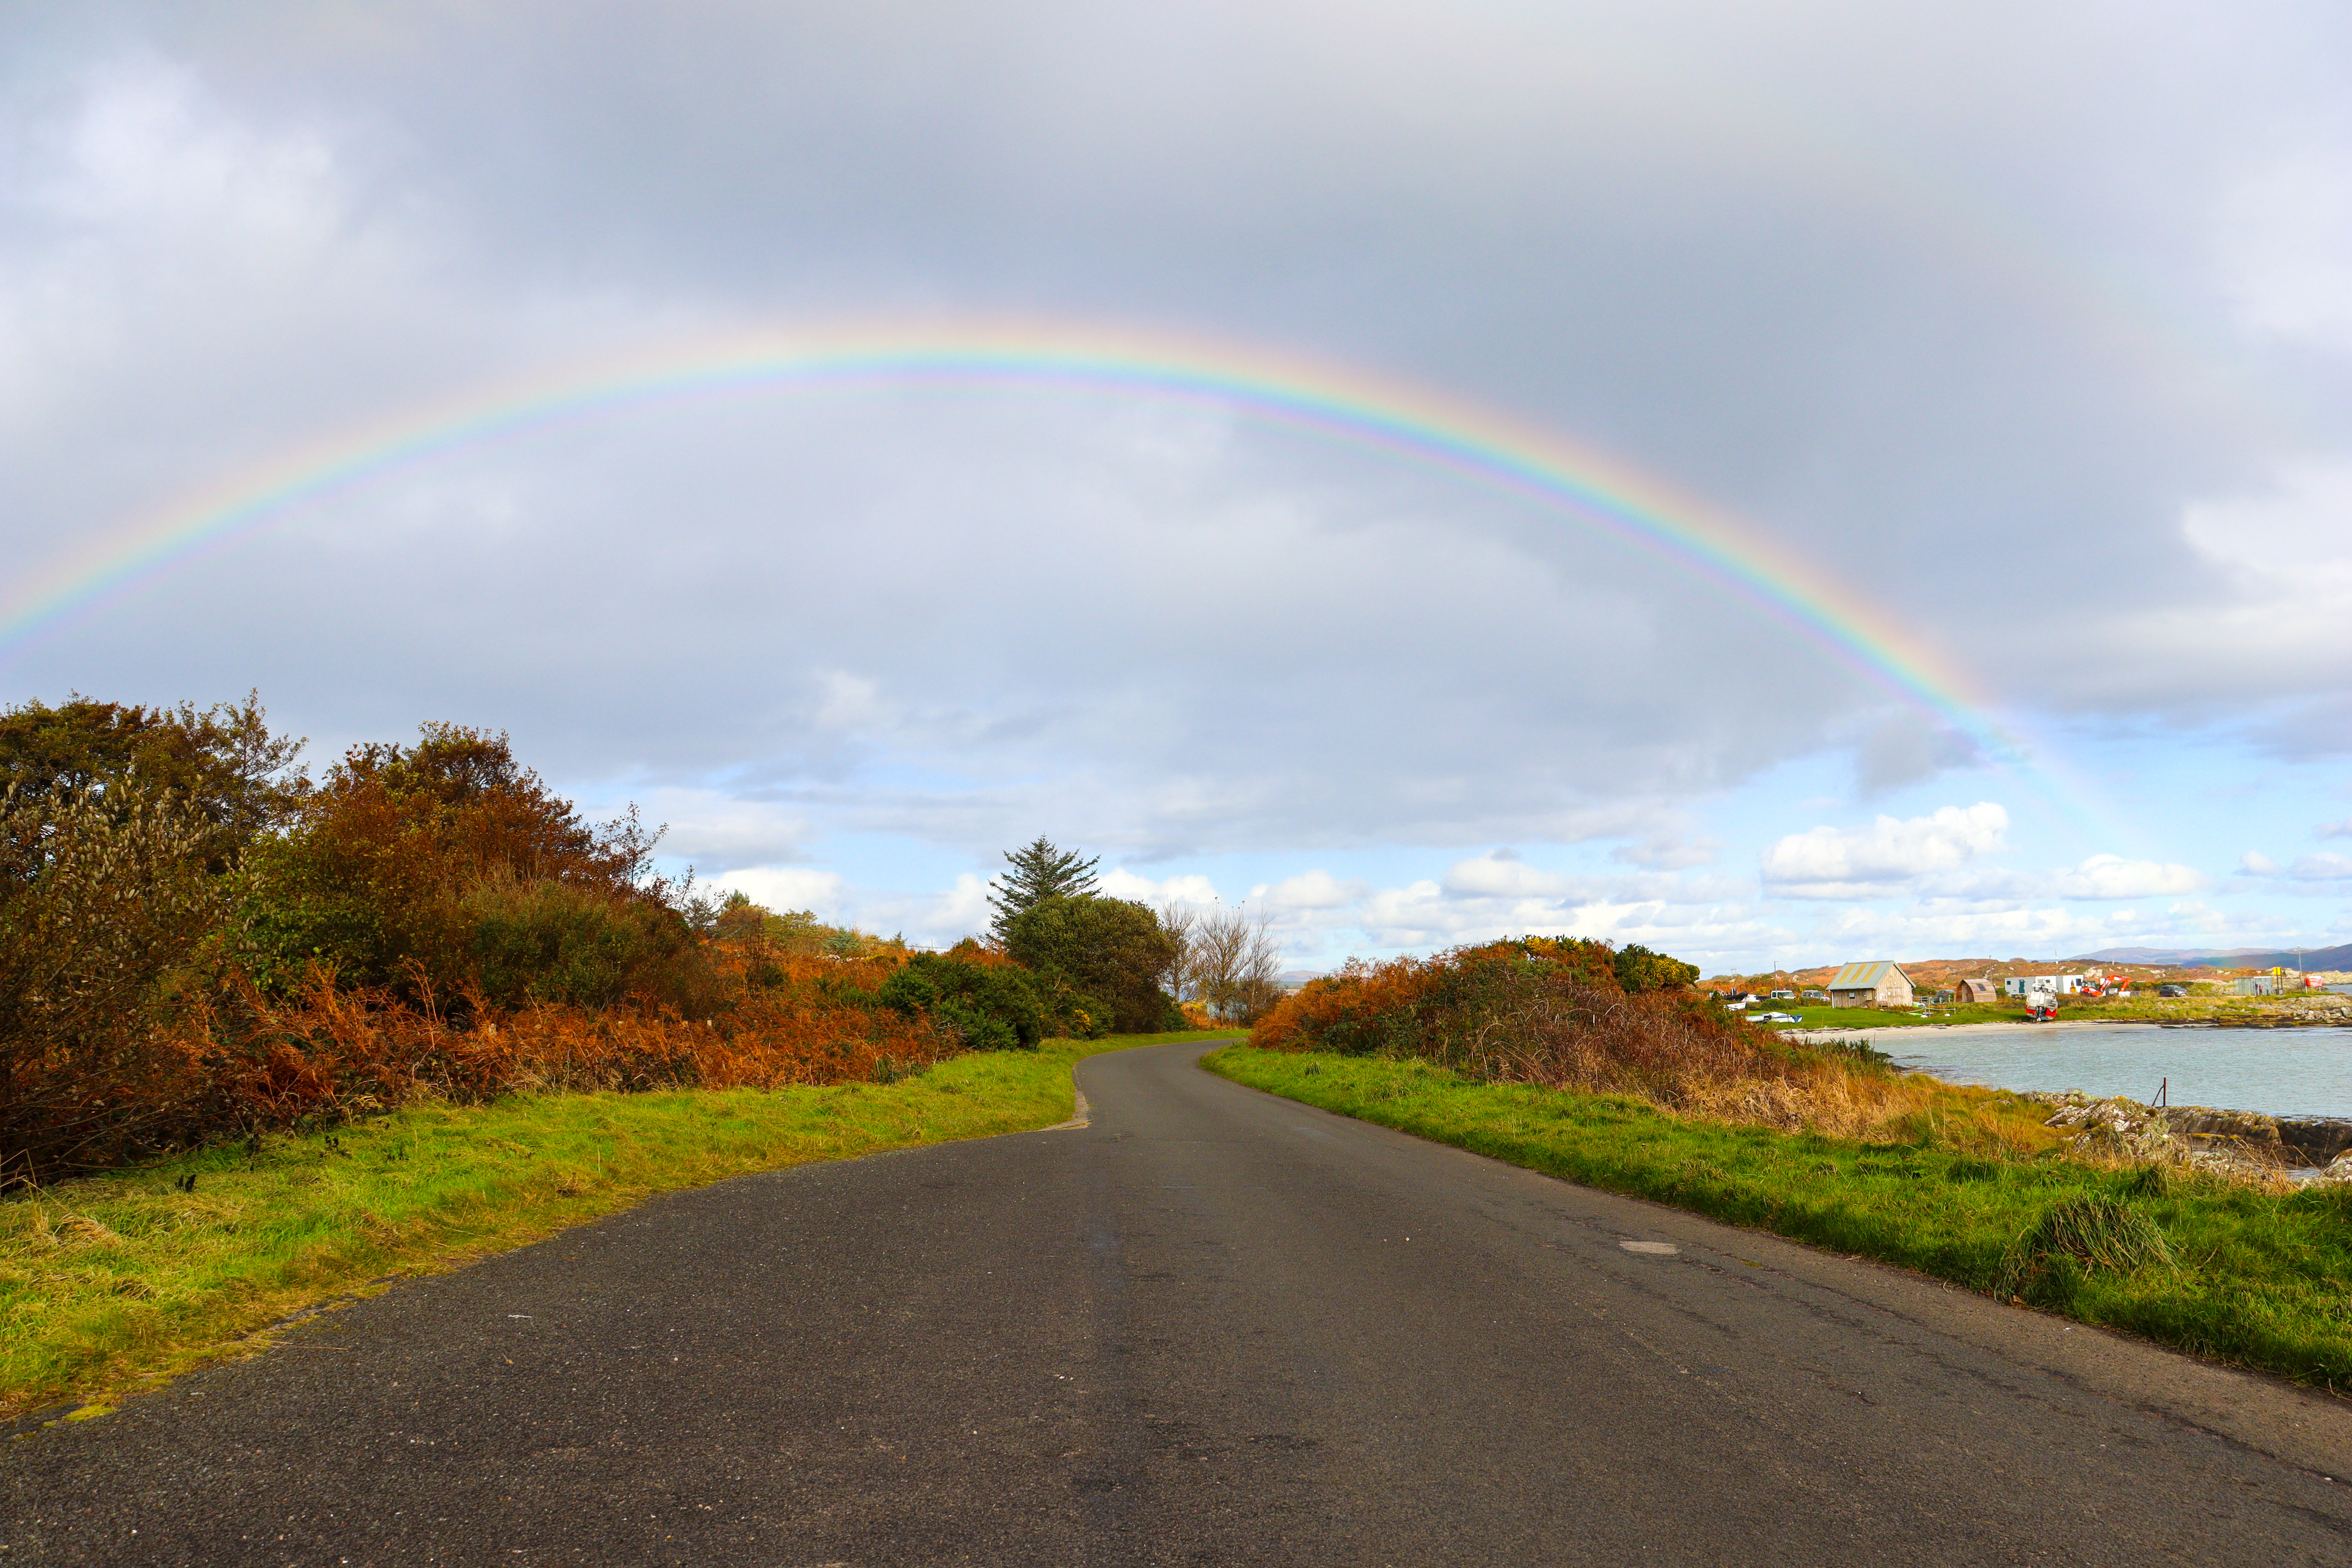 Road with sea to the right and a full rainbow covering them both.